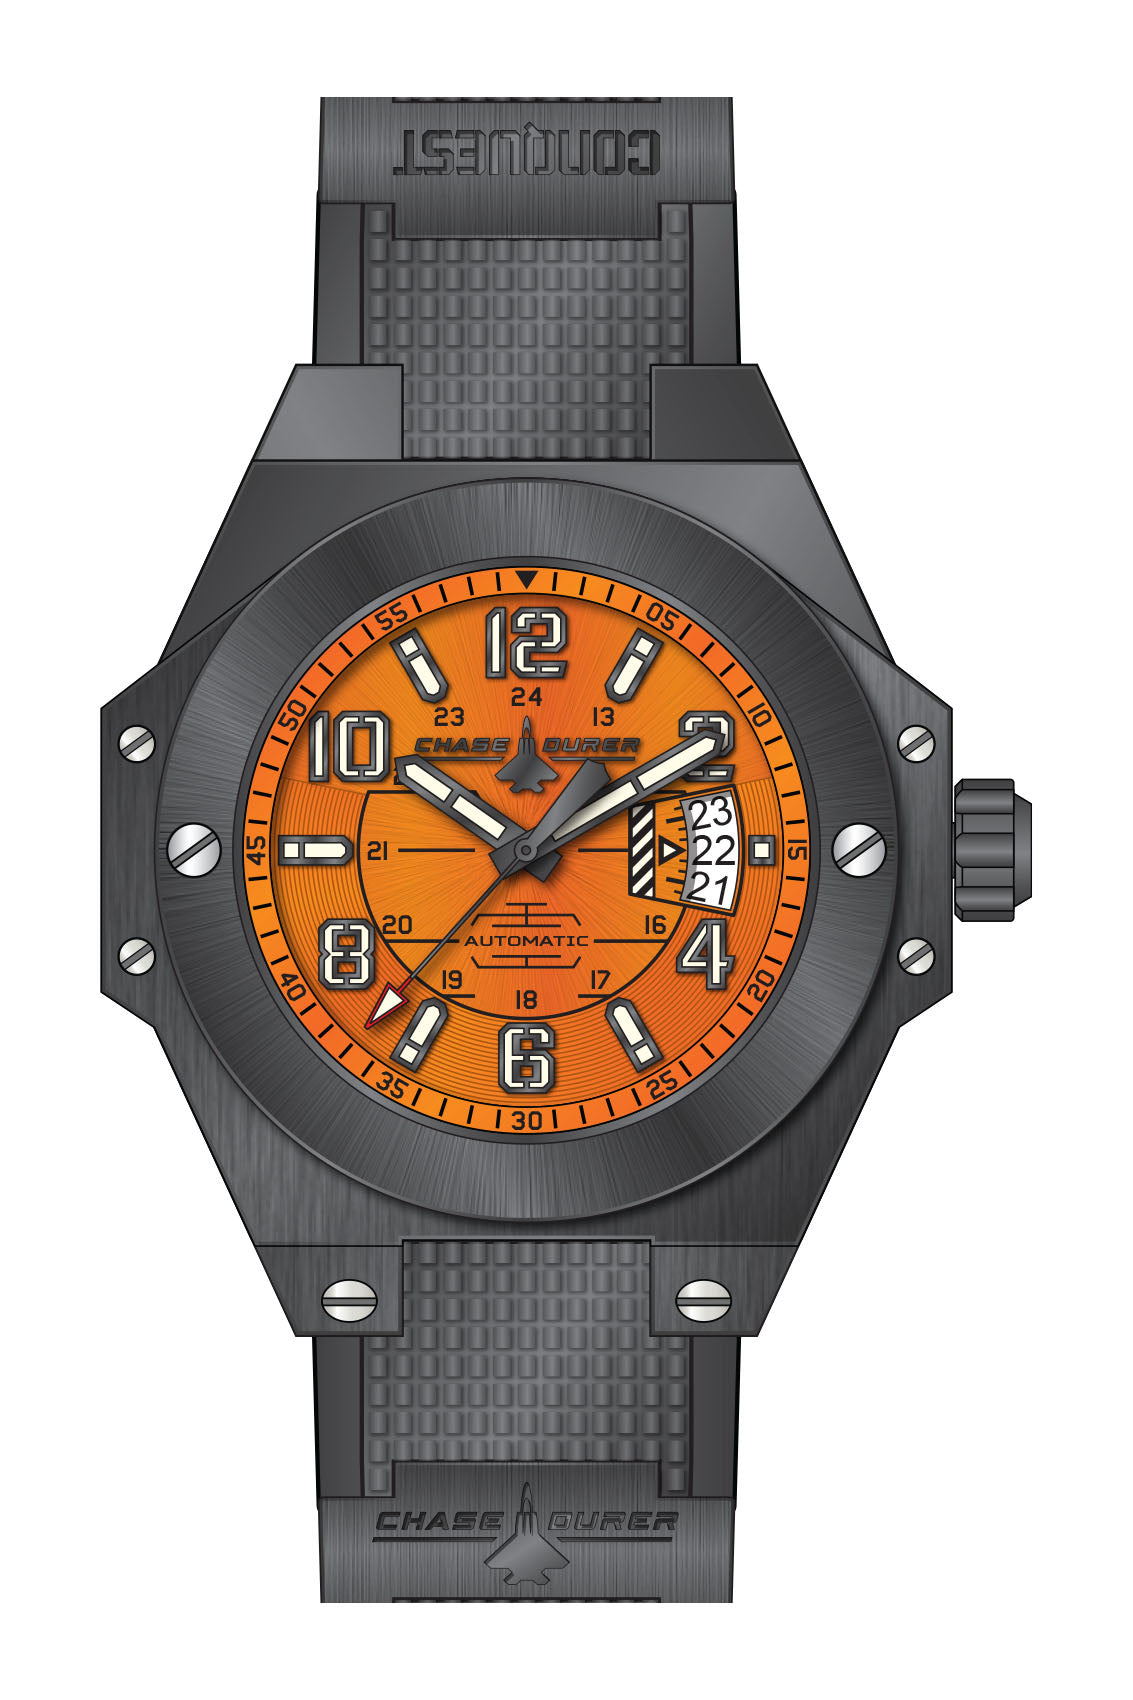 Band for Chase Durer Conquest Men CDW-0033